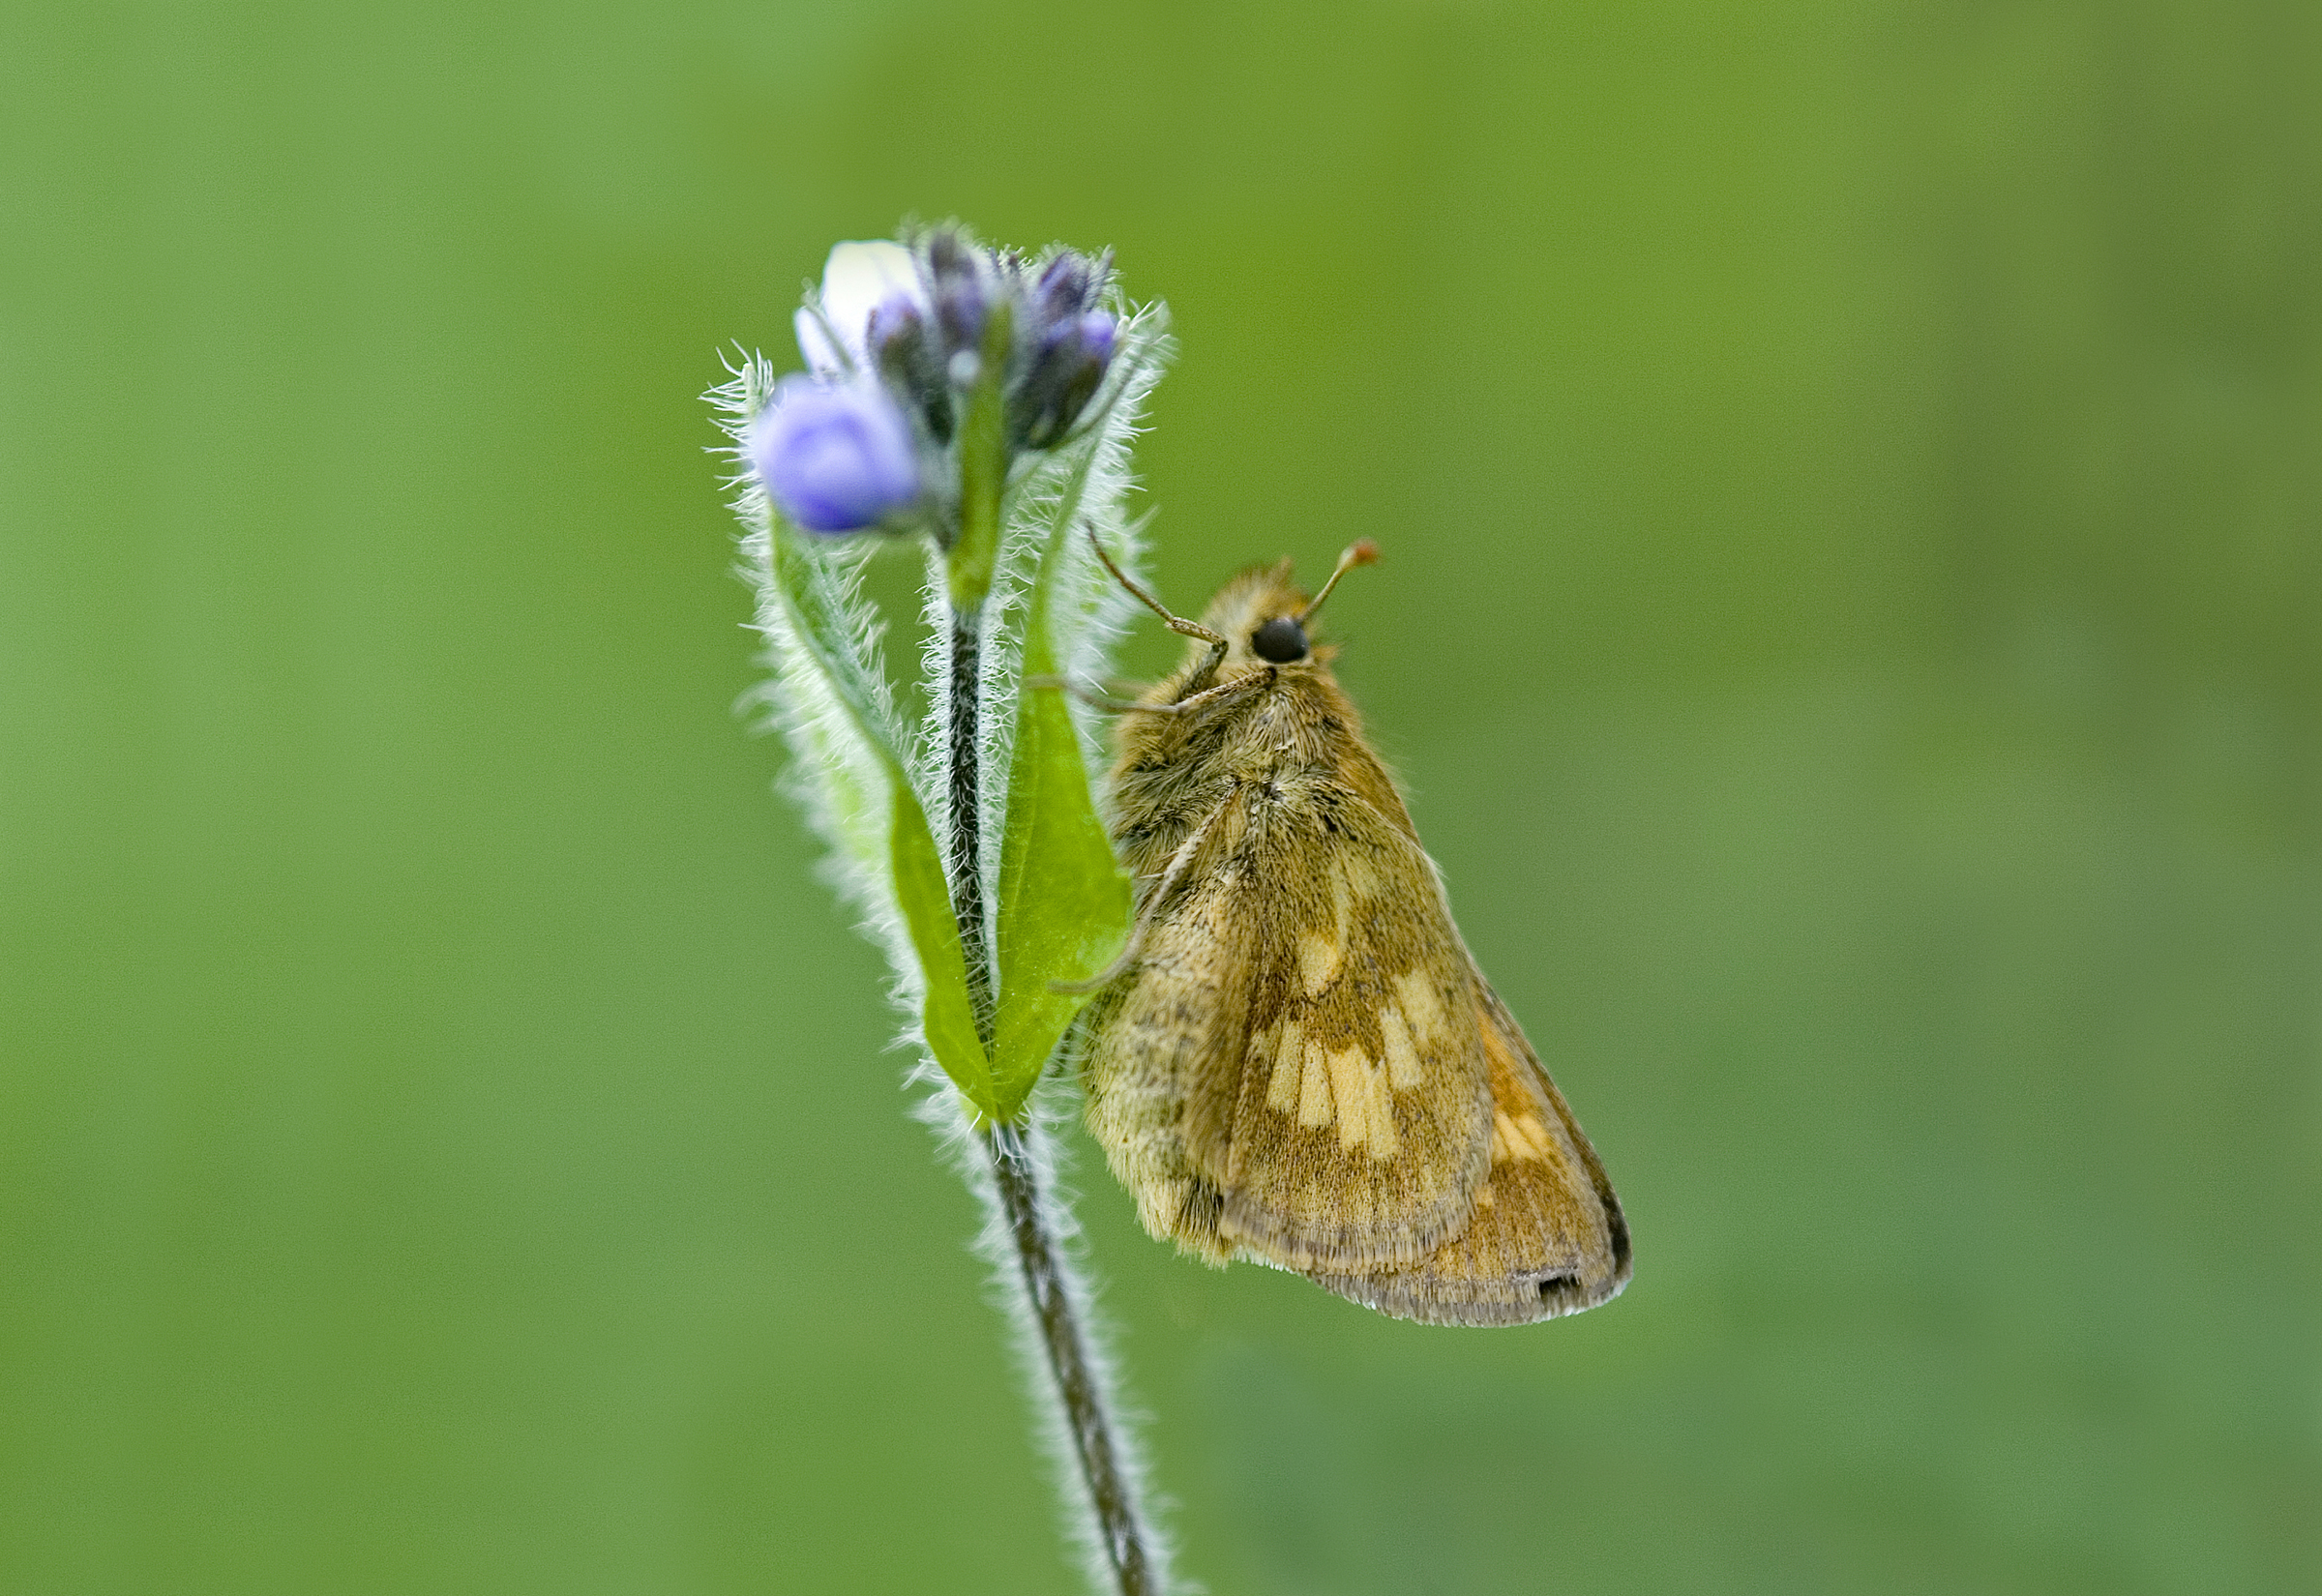 A small brown butterfly clings to an upright flower stem. It is set against a green background.